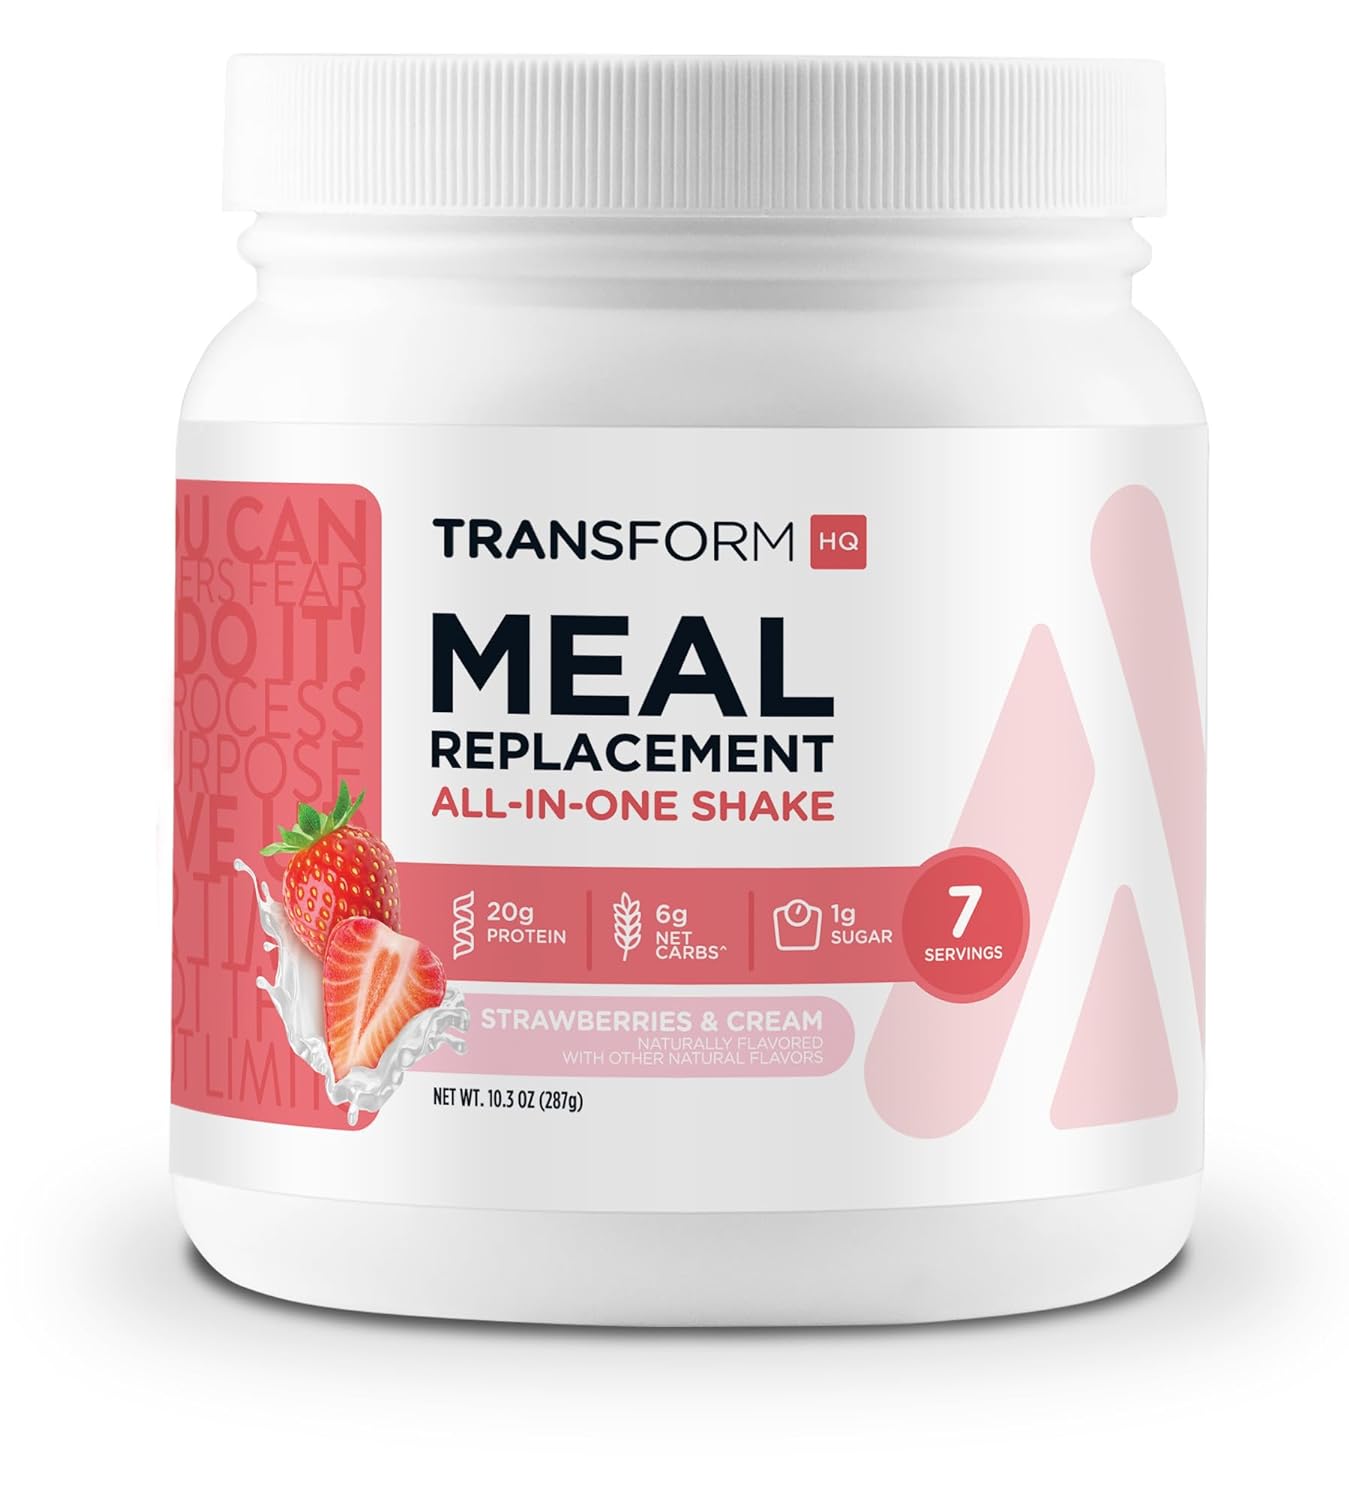 TransformHQ Meal Replacement Shake Powder 7 Servings (Strawberry & Cre